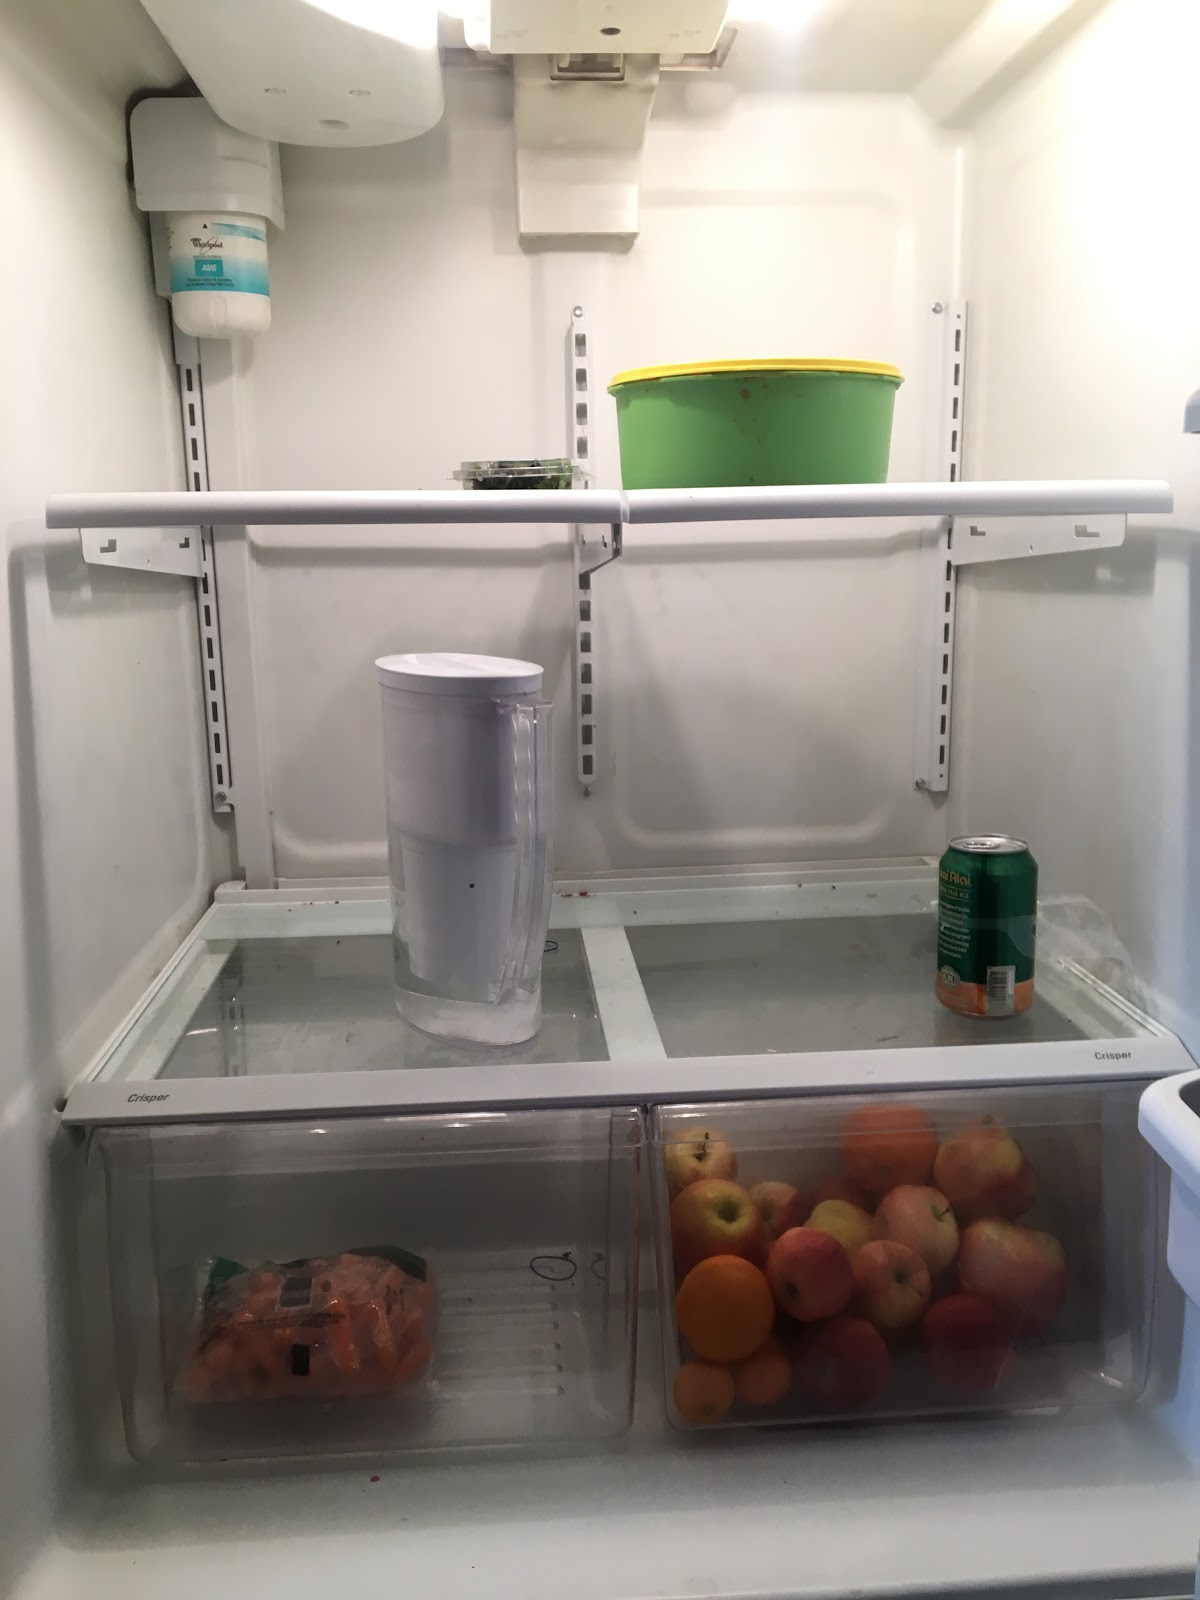 an inventory of the food in the fridge